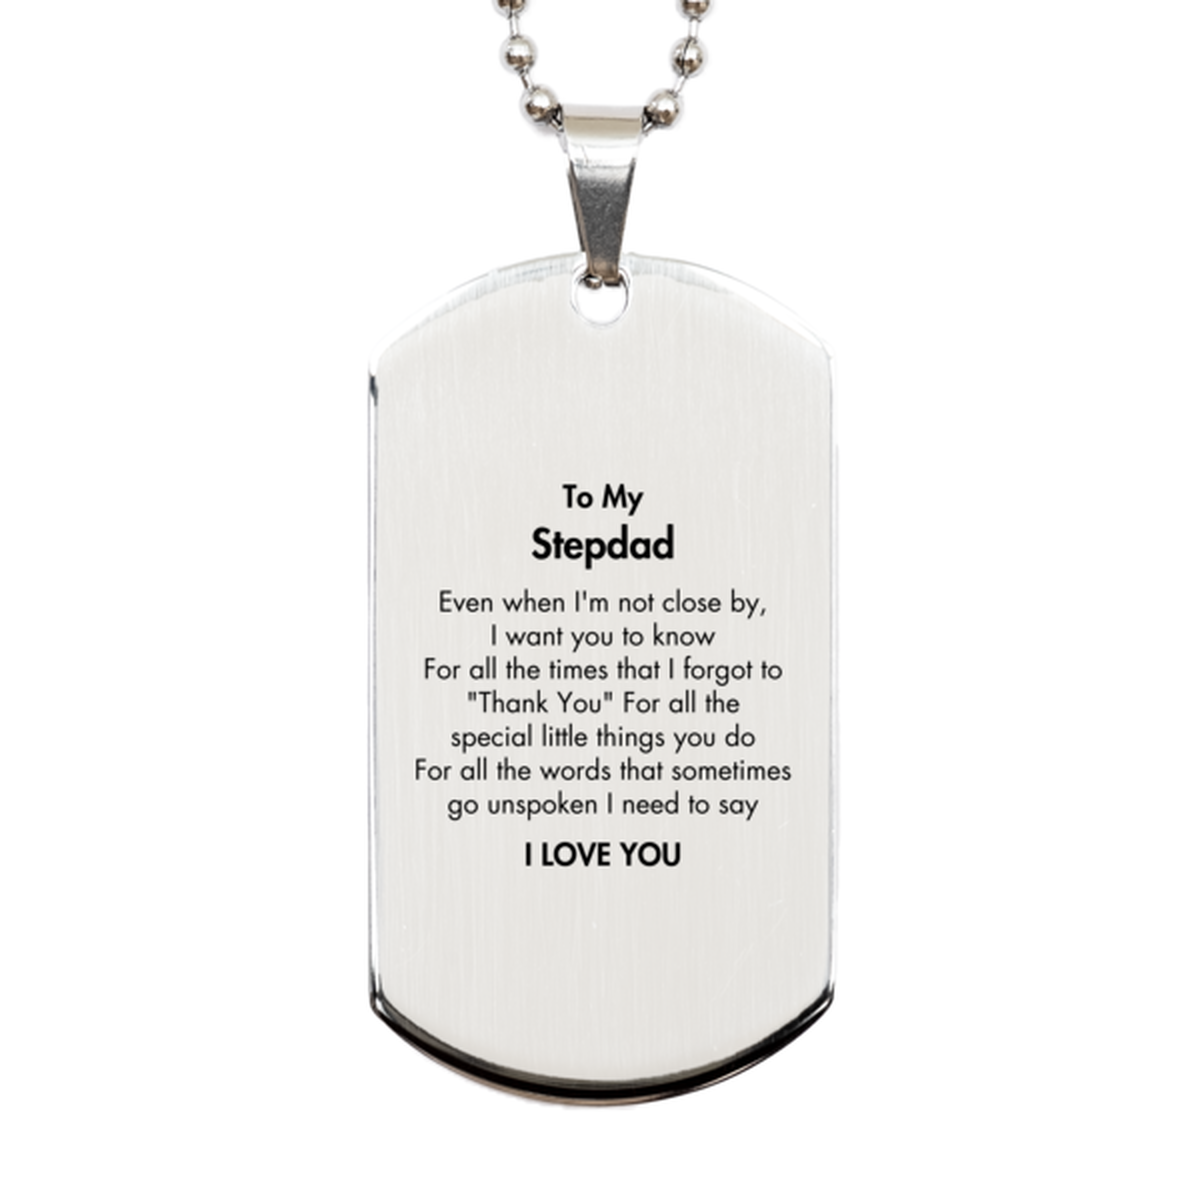 Thank You Gifts for Stepdad, Keepsake Silver Dog Tag Gifts for Stepdad Birthday Mother's day Father's Day Stepdad For all the words That sometimes go unspoken I need to say I LOVE YOU